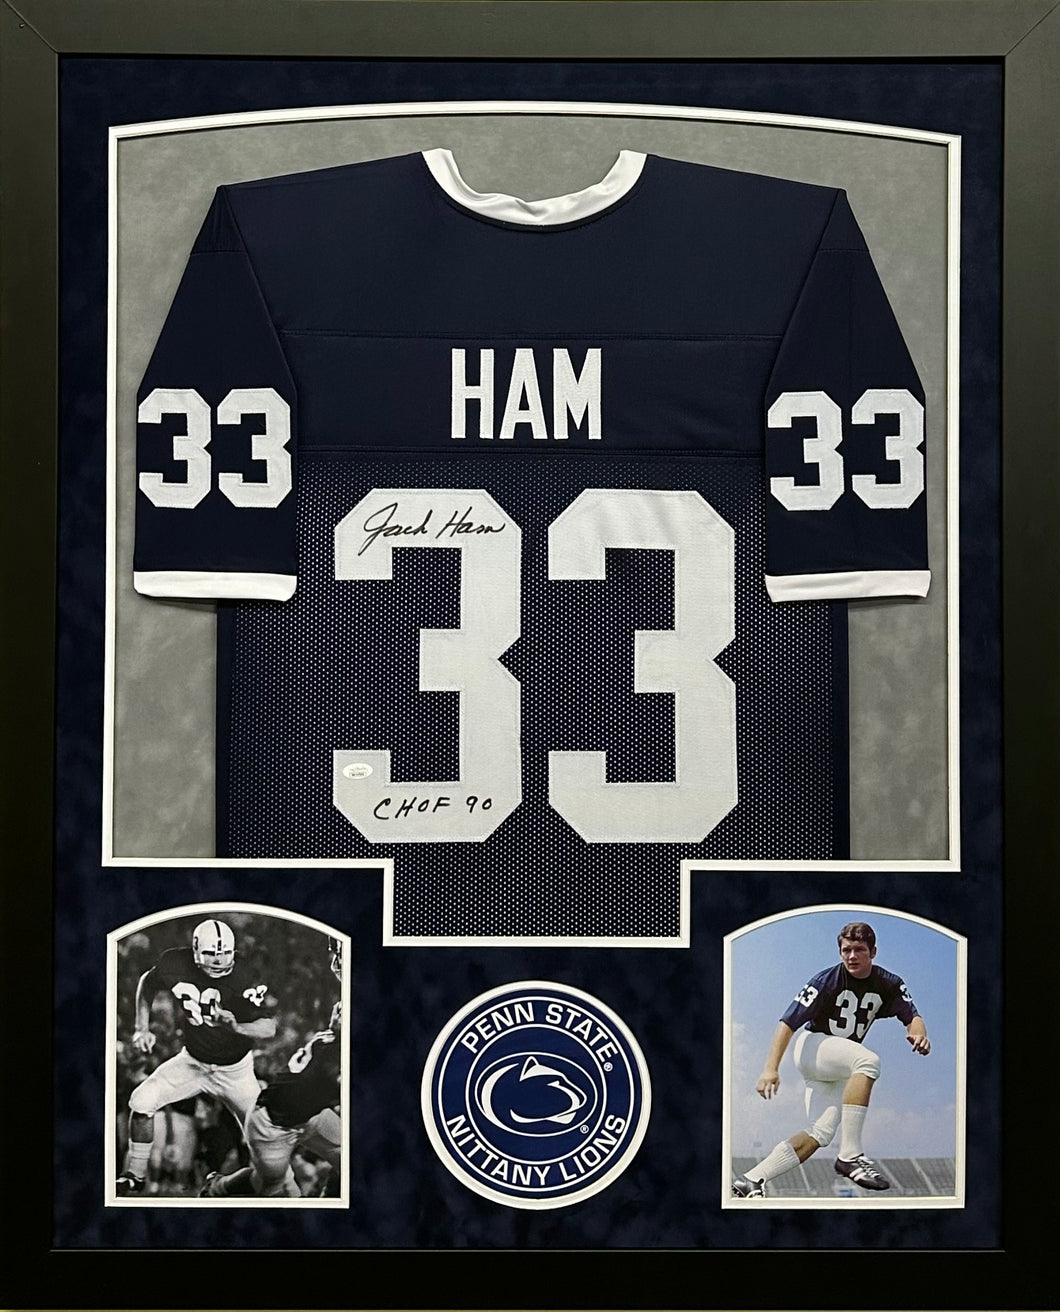 Penn State Nittany Lions Jack Ham Signed Custom Blue Jersey with CHOF 90 Inscription Framed & Suede Matted with JSA COA